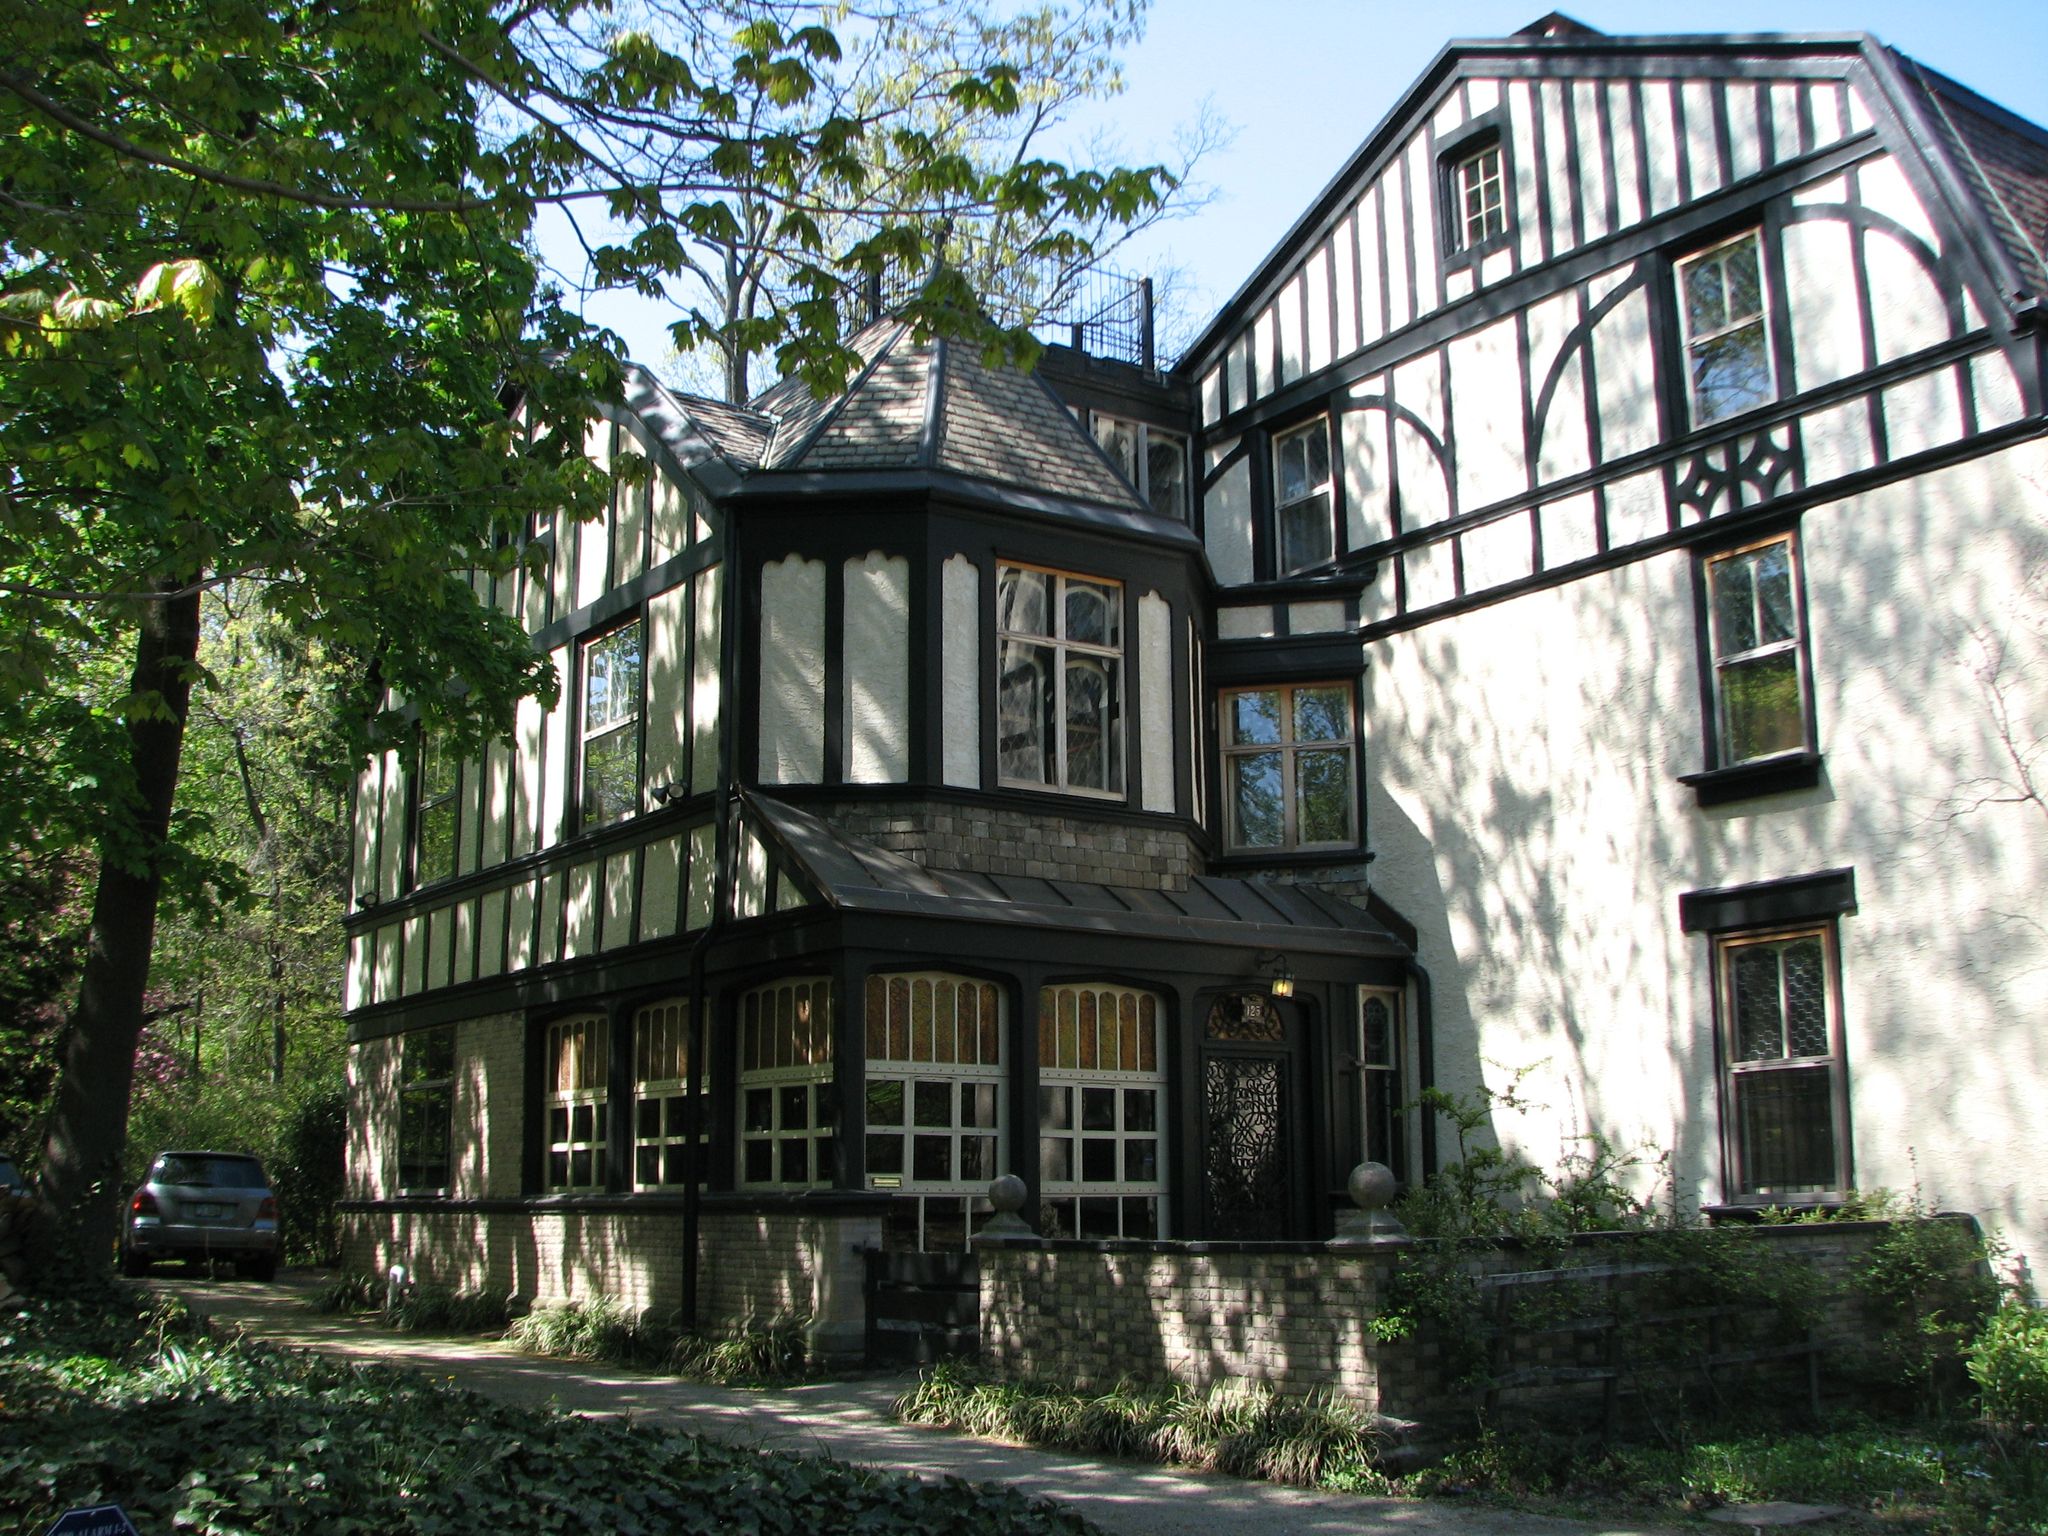 The Flemish Dutch chalet at 125 West Walnut was designed by and was the home of George T. Pearson.